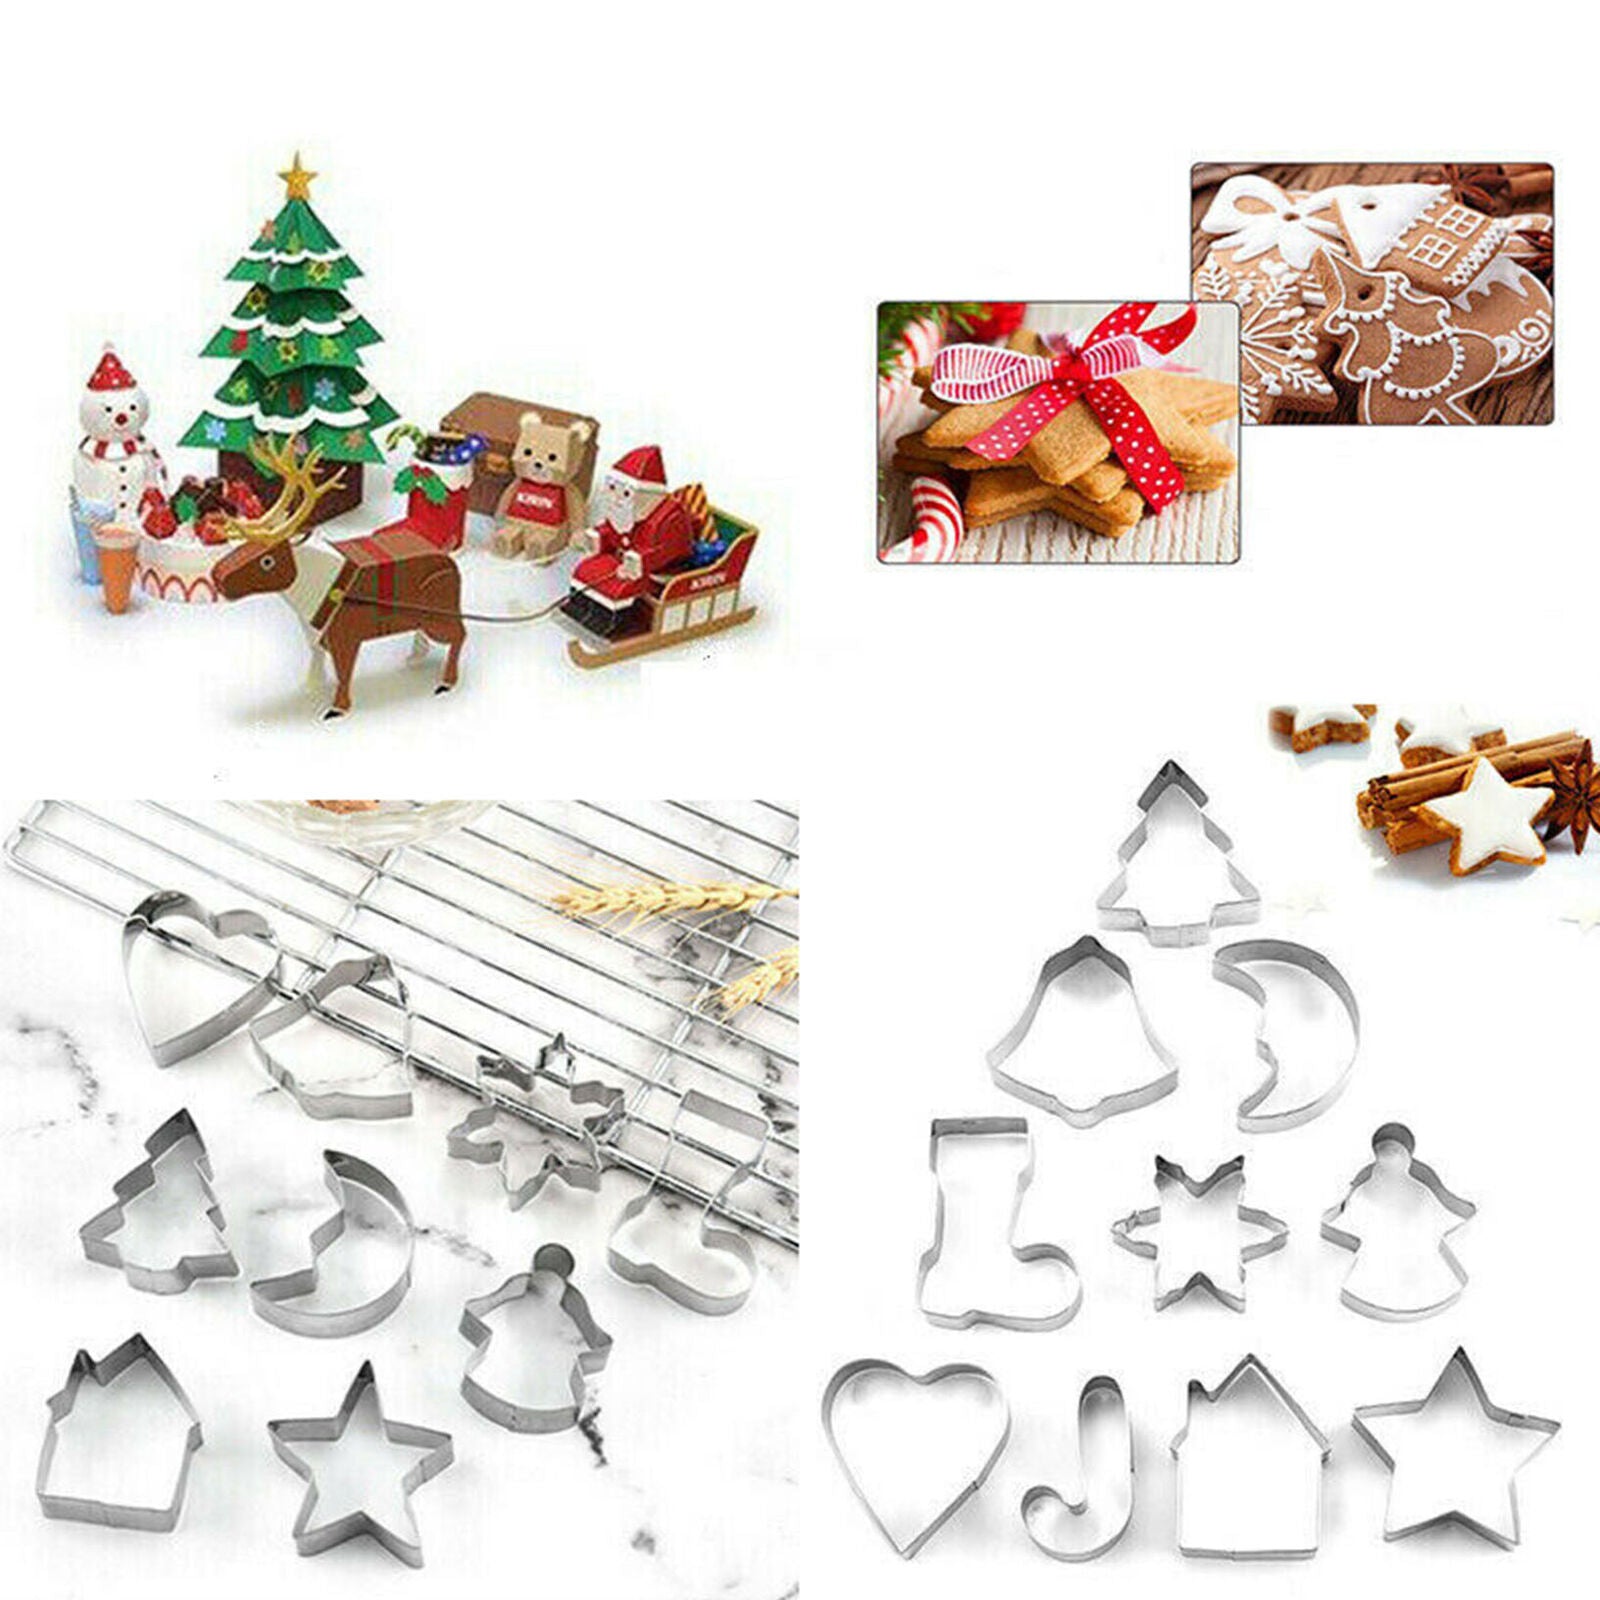 10pcs Christmas Metal Cookie Cutters Set Star Tree Bell Angel Candy Cane Biscuit